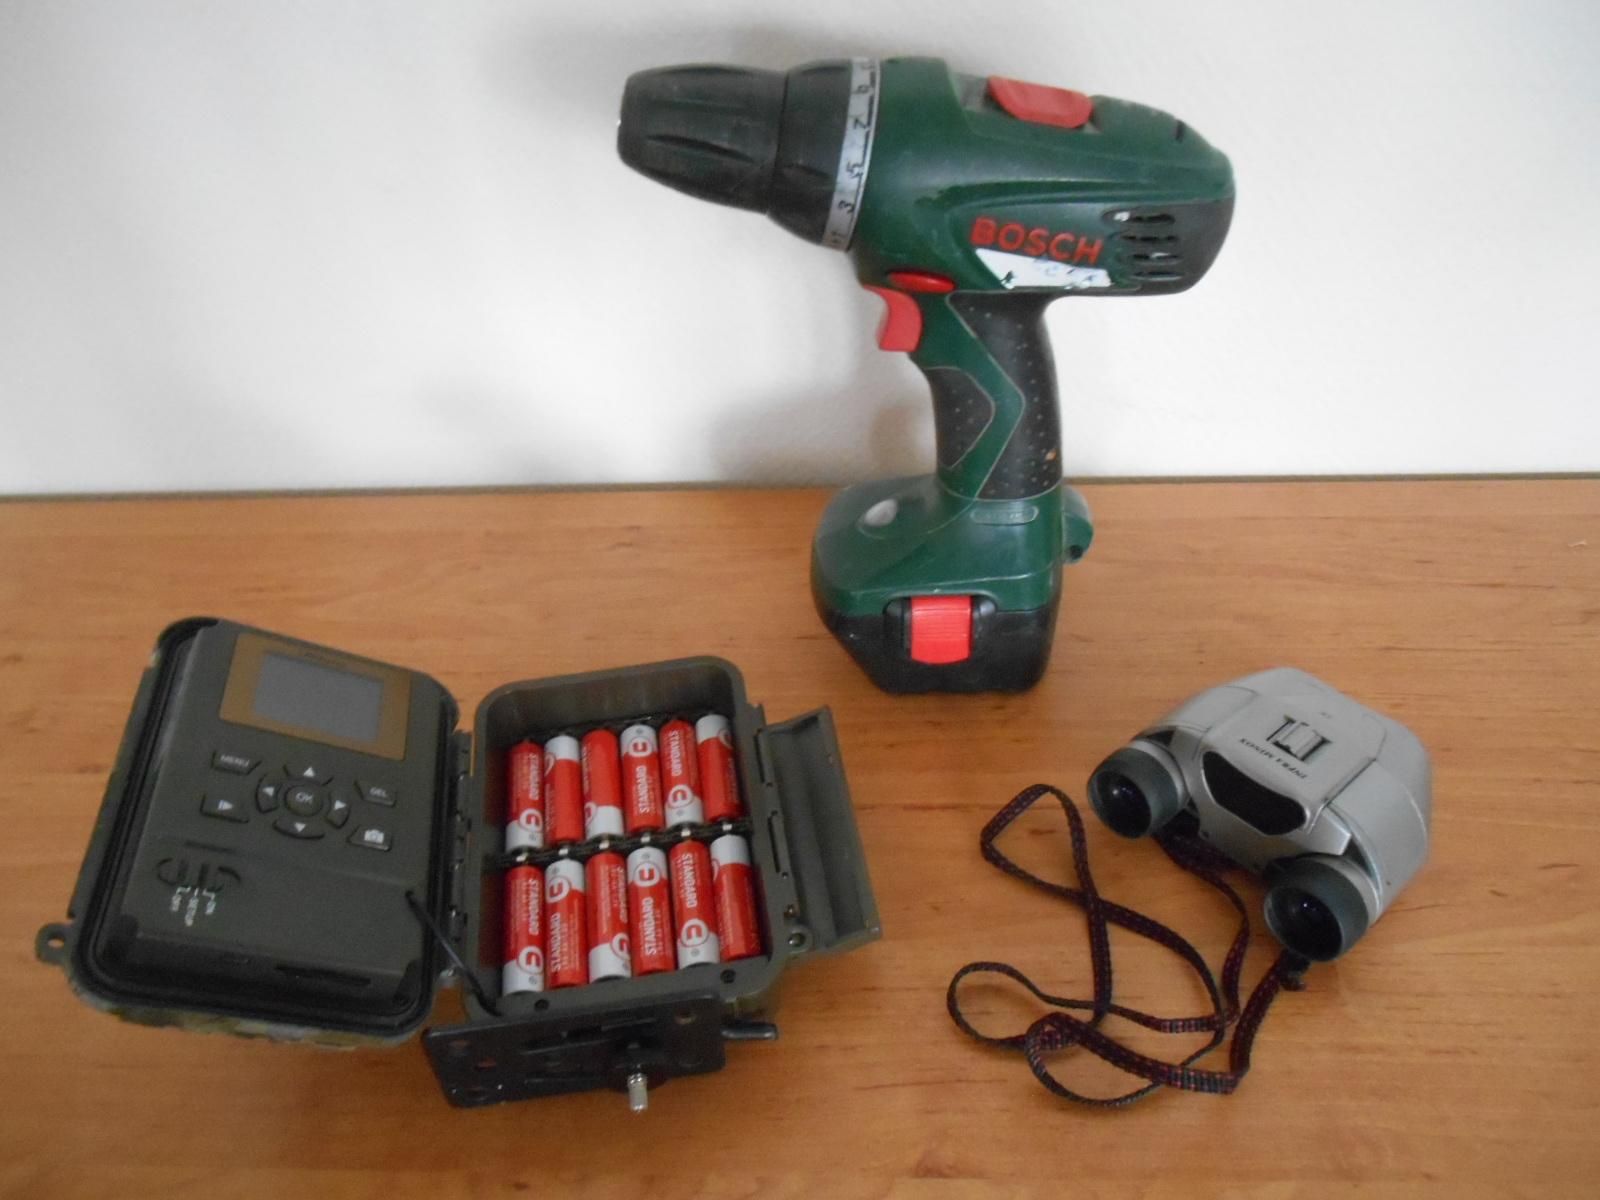 Null Set includes:
- BOSCH. Cordless drill, no. 985002457, (2009), without spind&hellip;